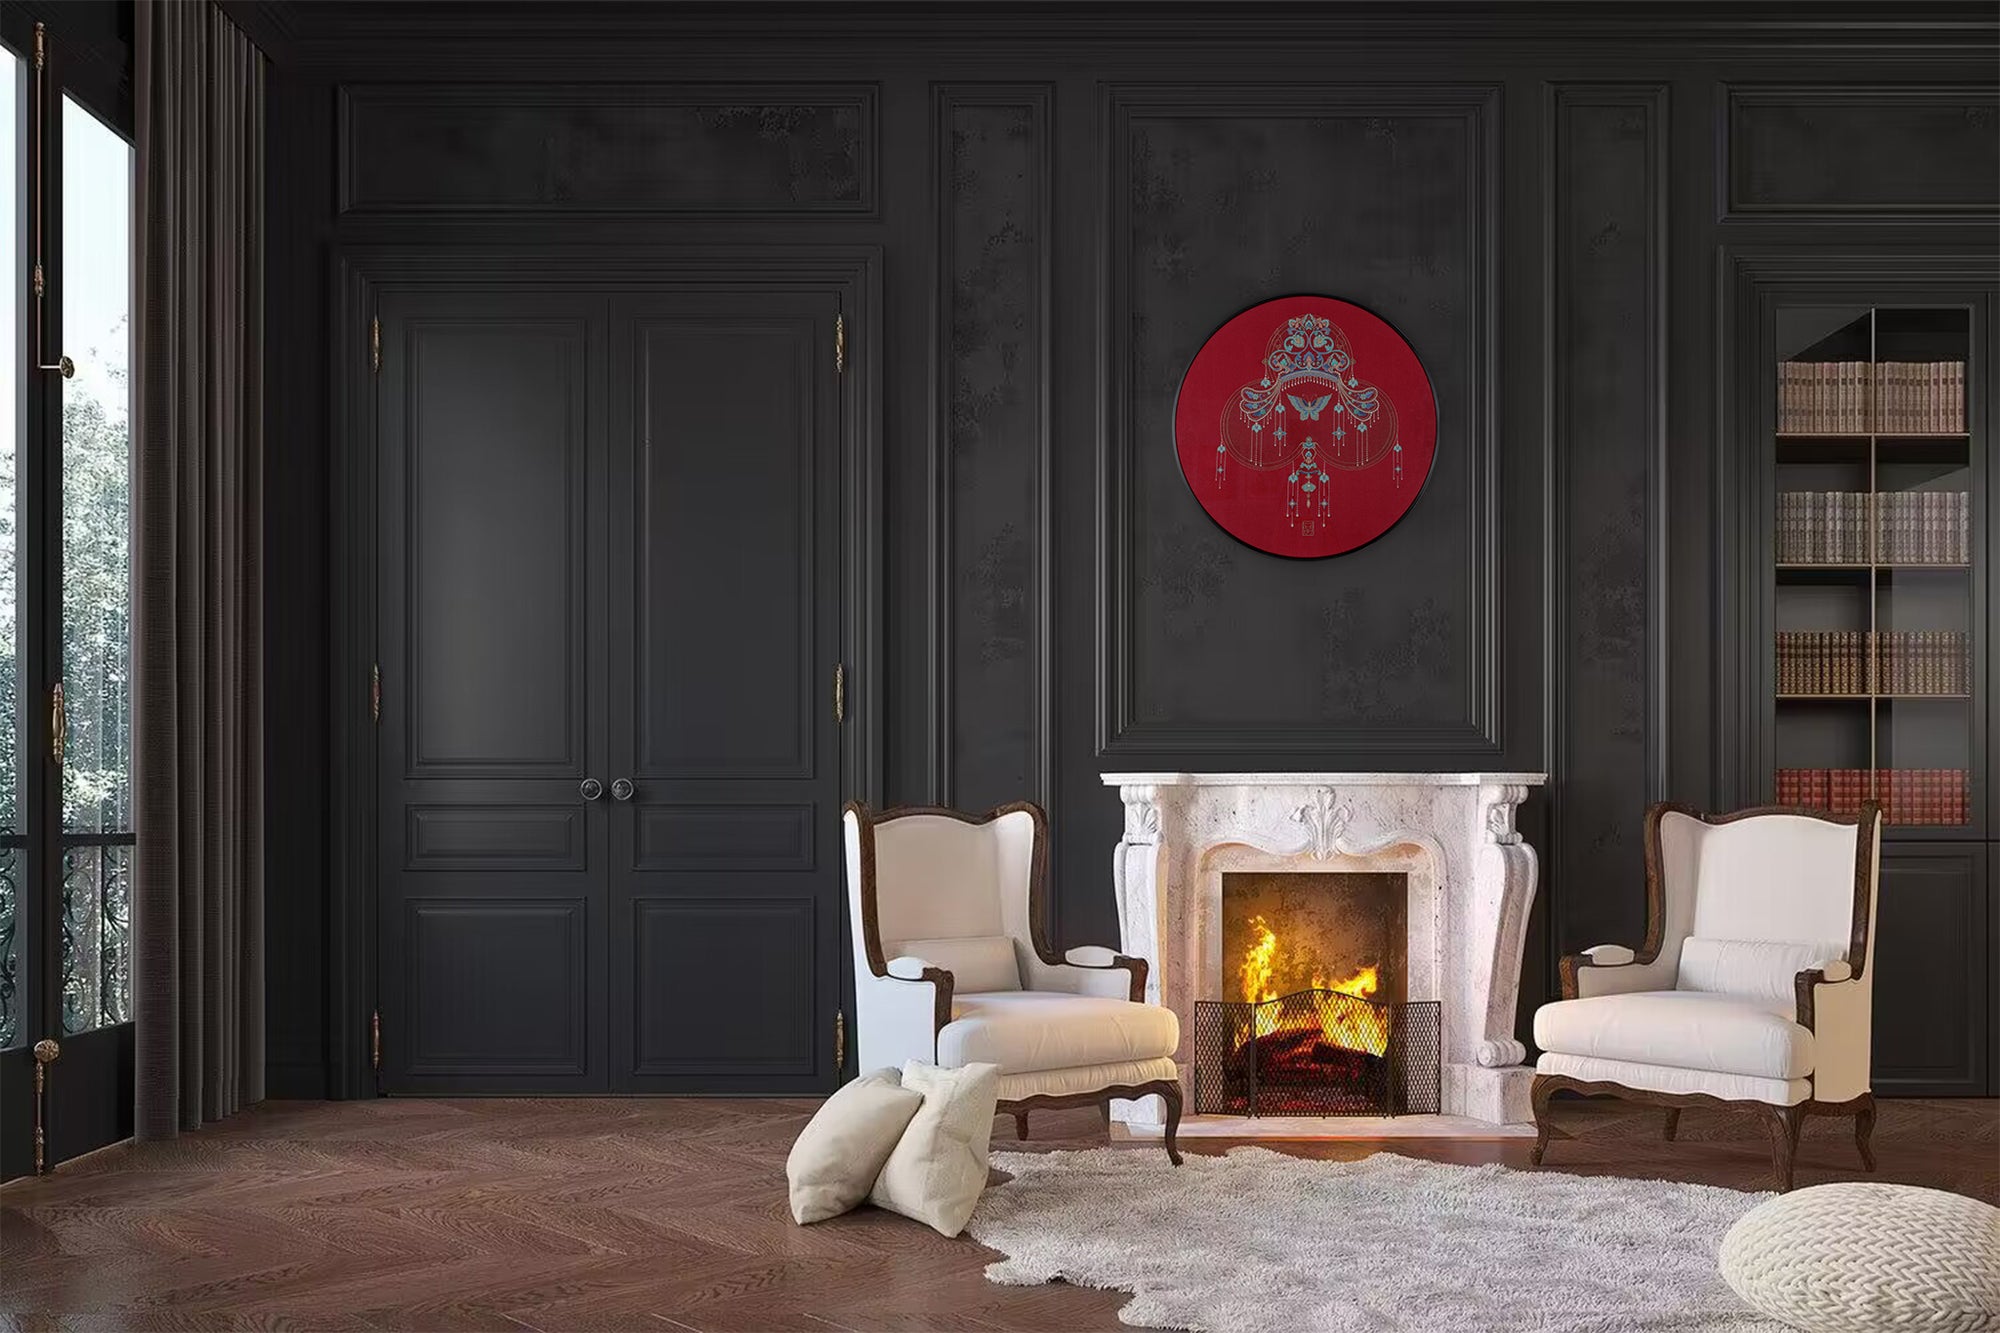 In a living room with black as the theme color, the wall is placed with embroidery art containing Oriental culture, with white fireplace and elegant white home, the living room is full of elegant feeling.